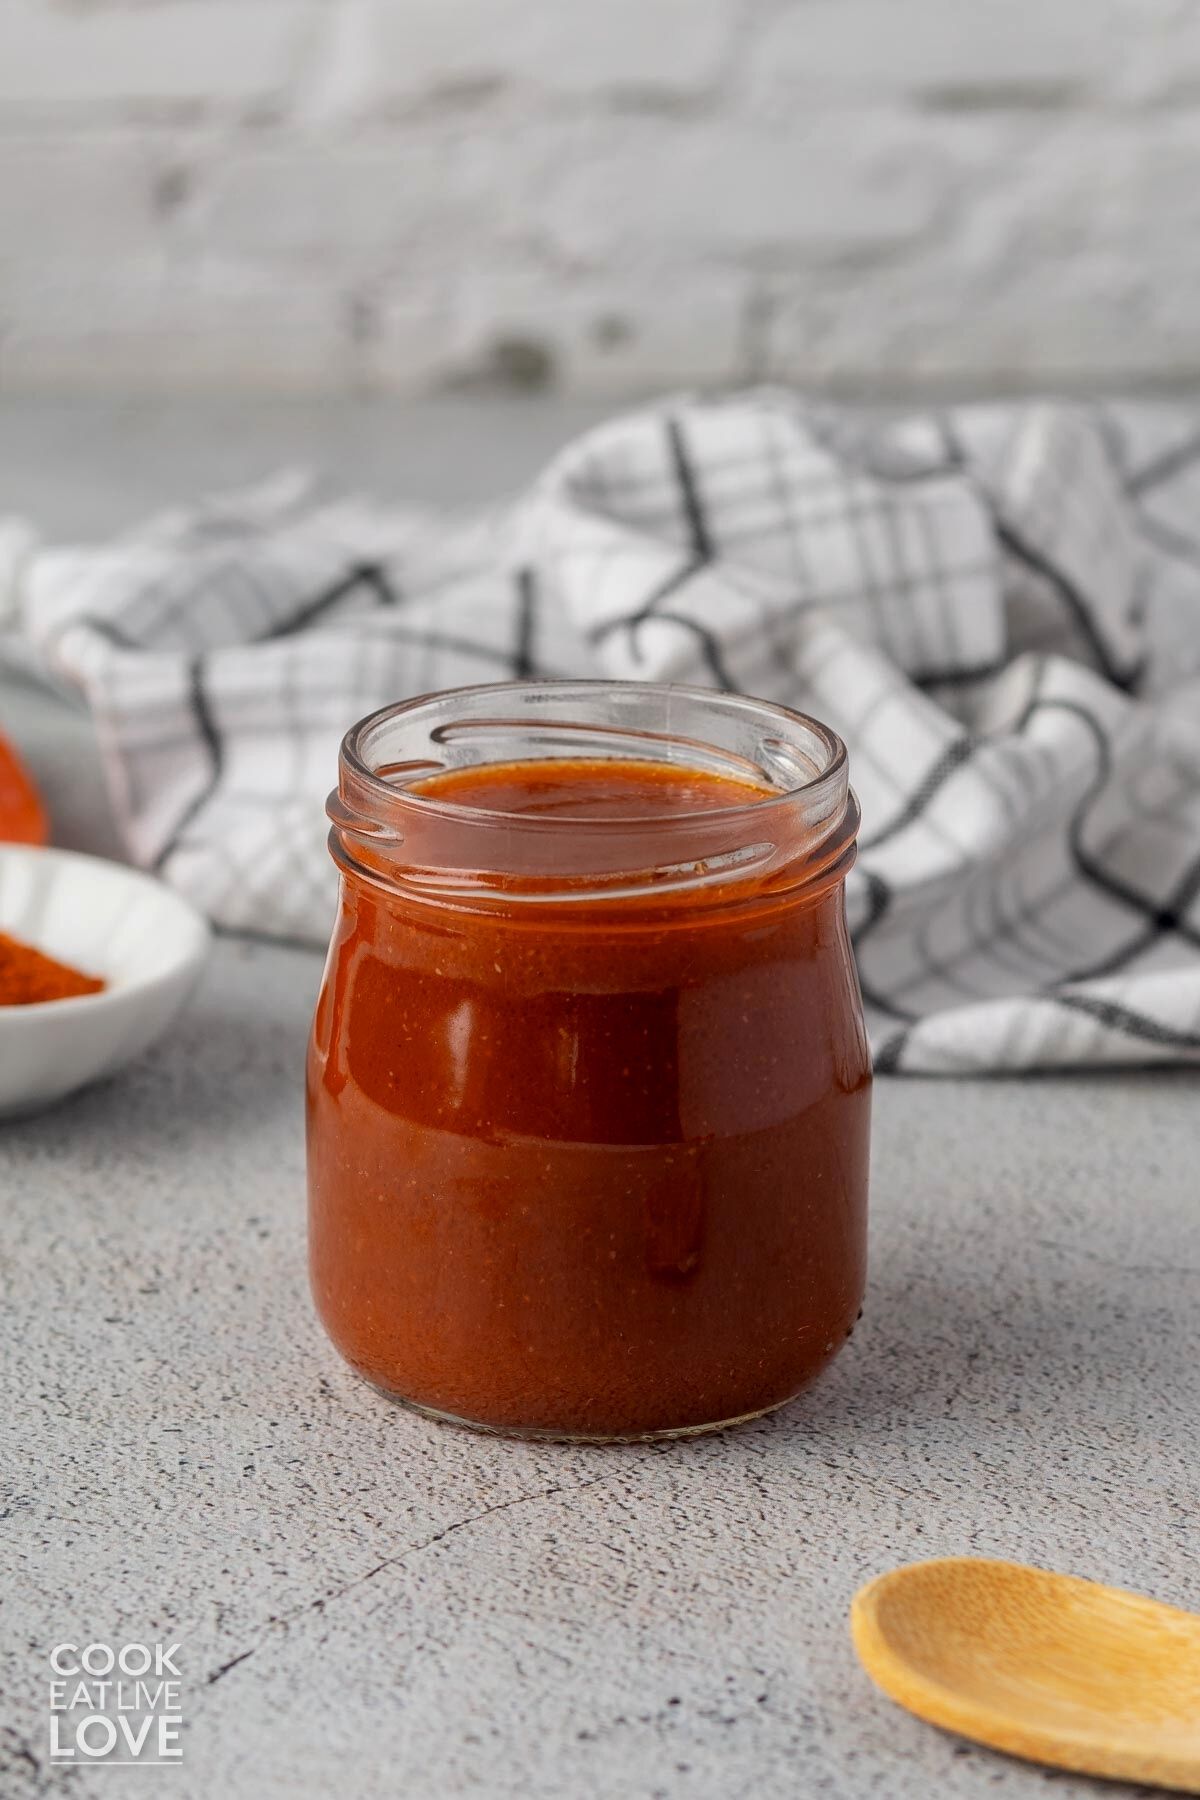 A jar of buffalo sauce made vegan on the table with a towel behind it.